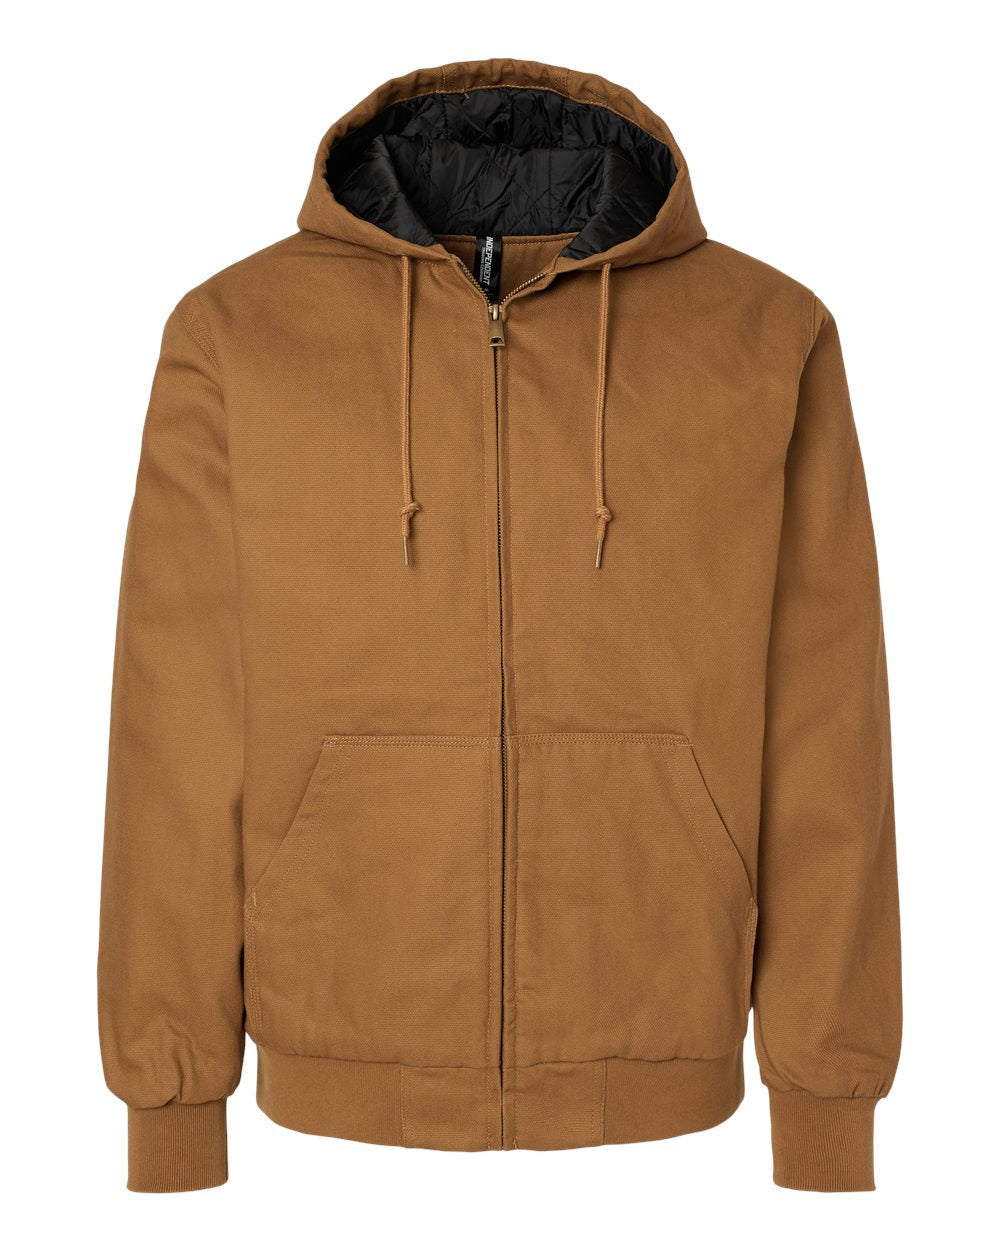 Independent Trading Co. - Insulated Canvas Workwear Jacket